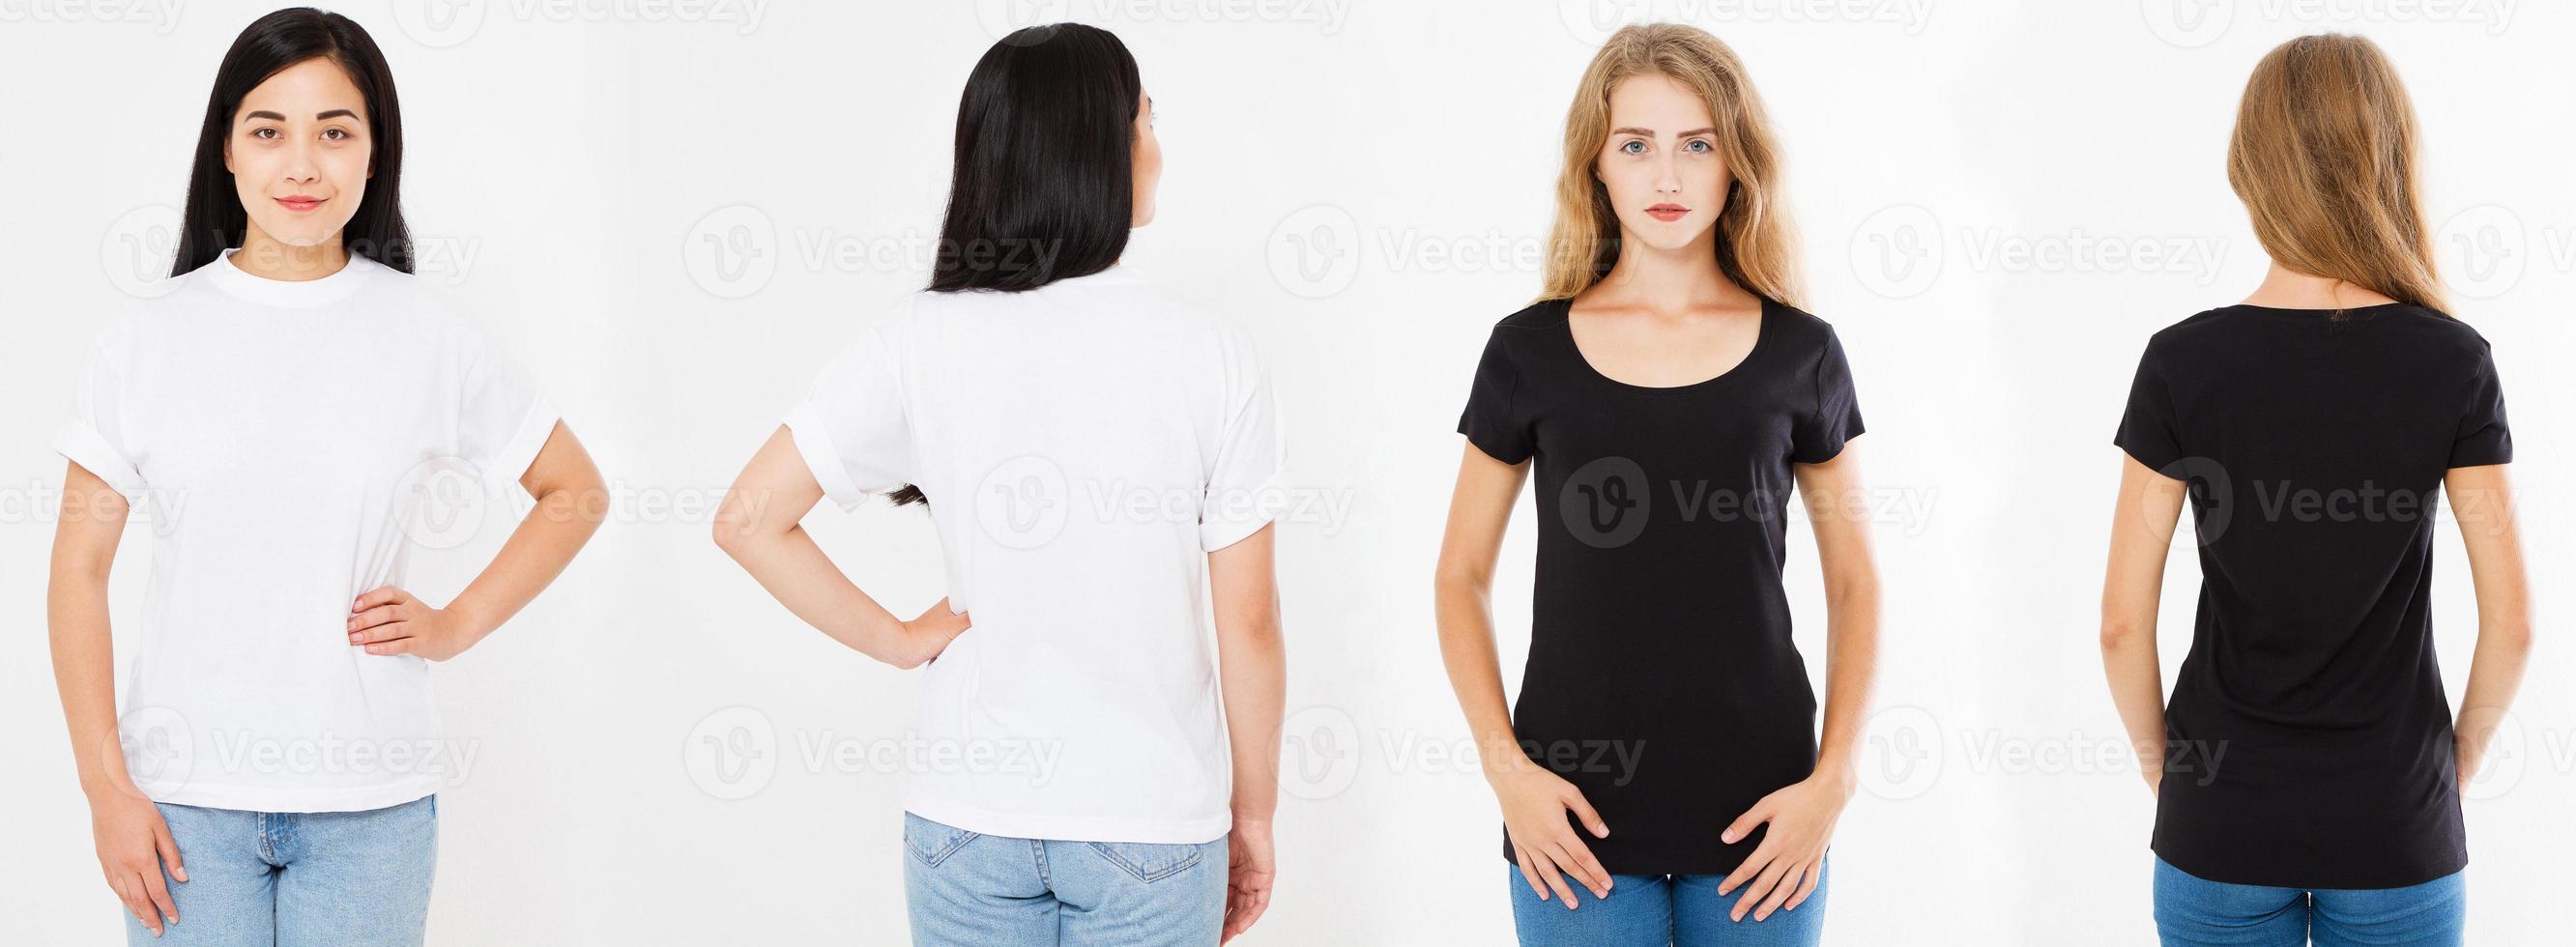 set,collage asian korean woman and caucasian woman in white and black t shirt, front back views t-shirt photo